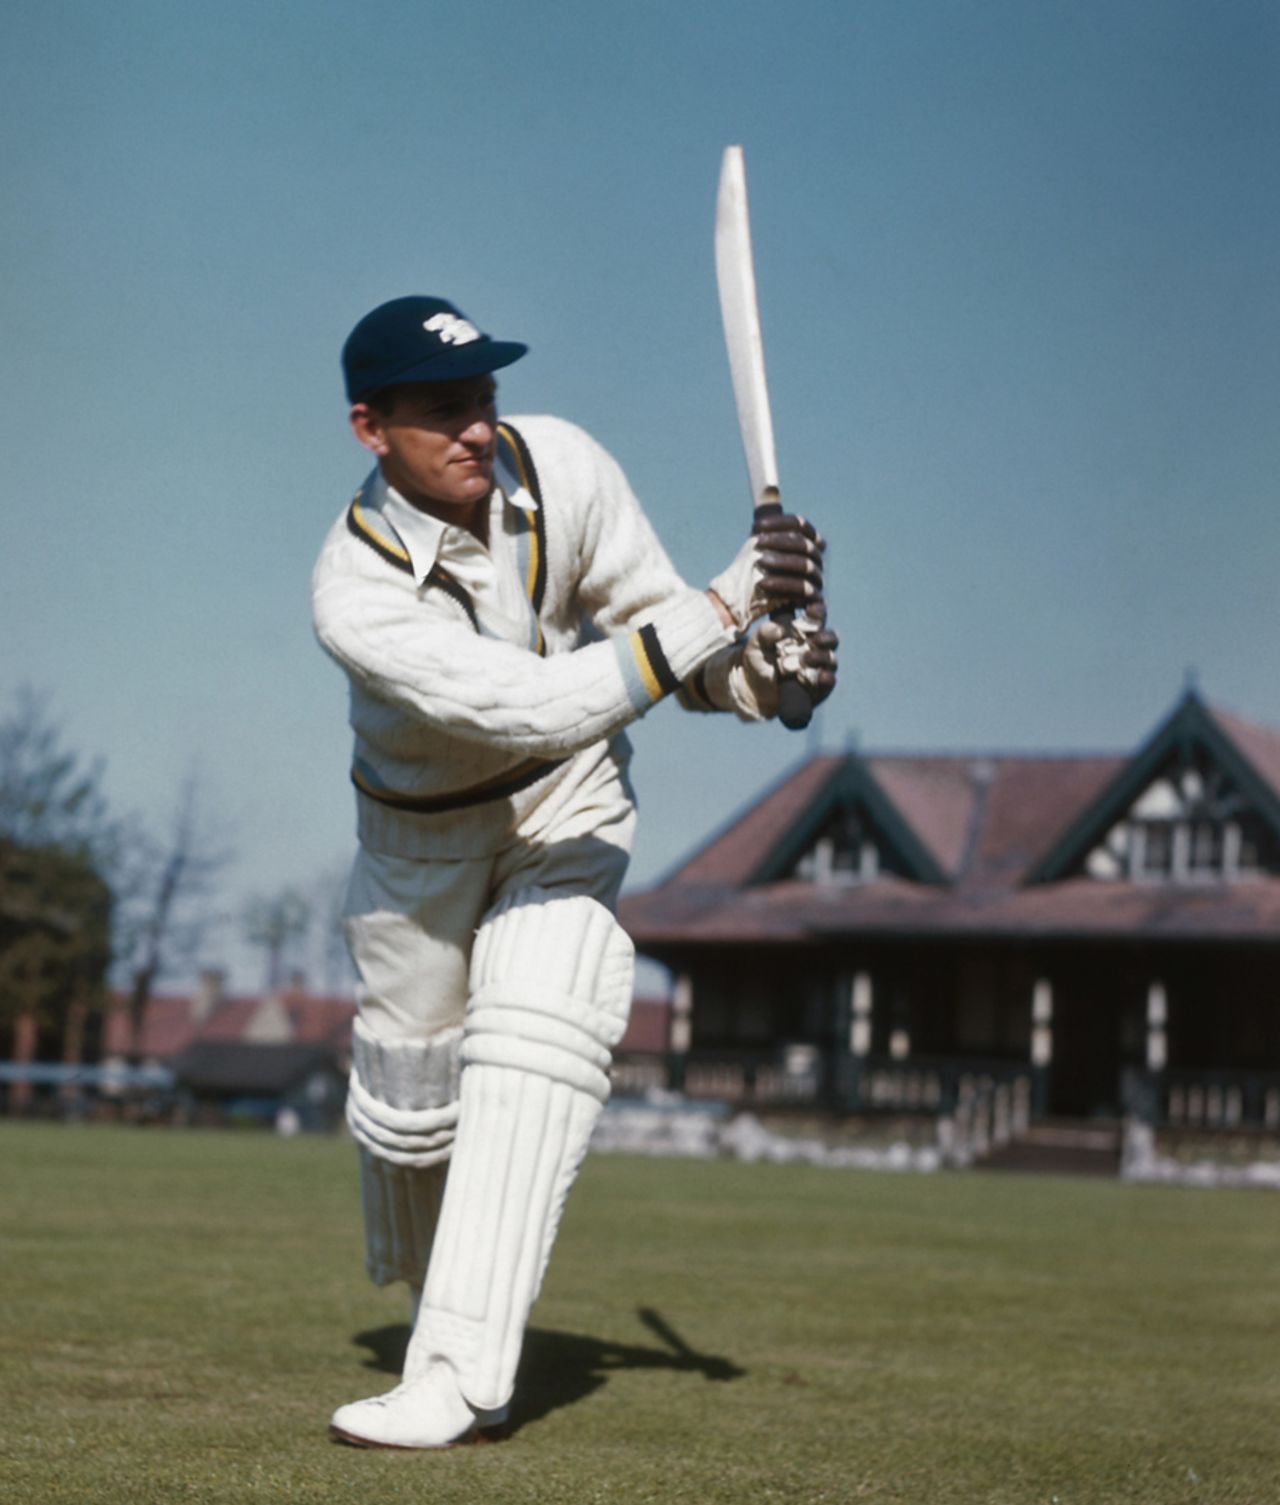 Len Hutton in a posed photo in 1955